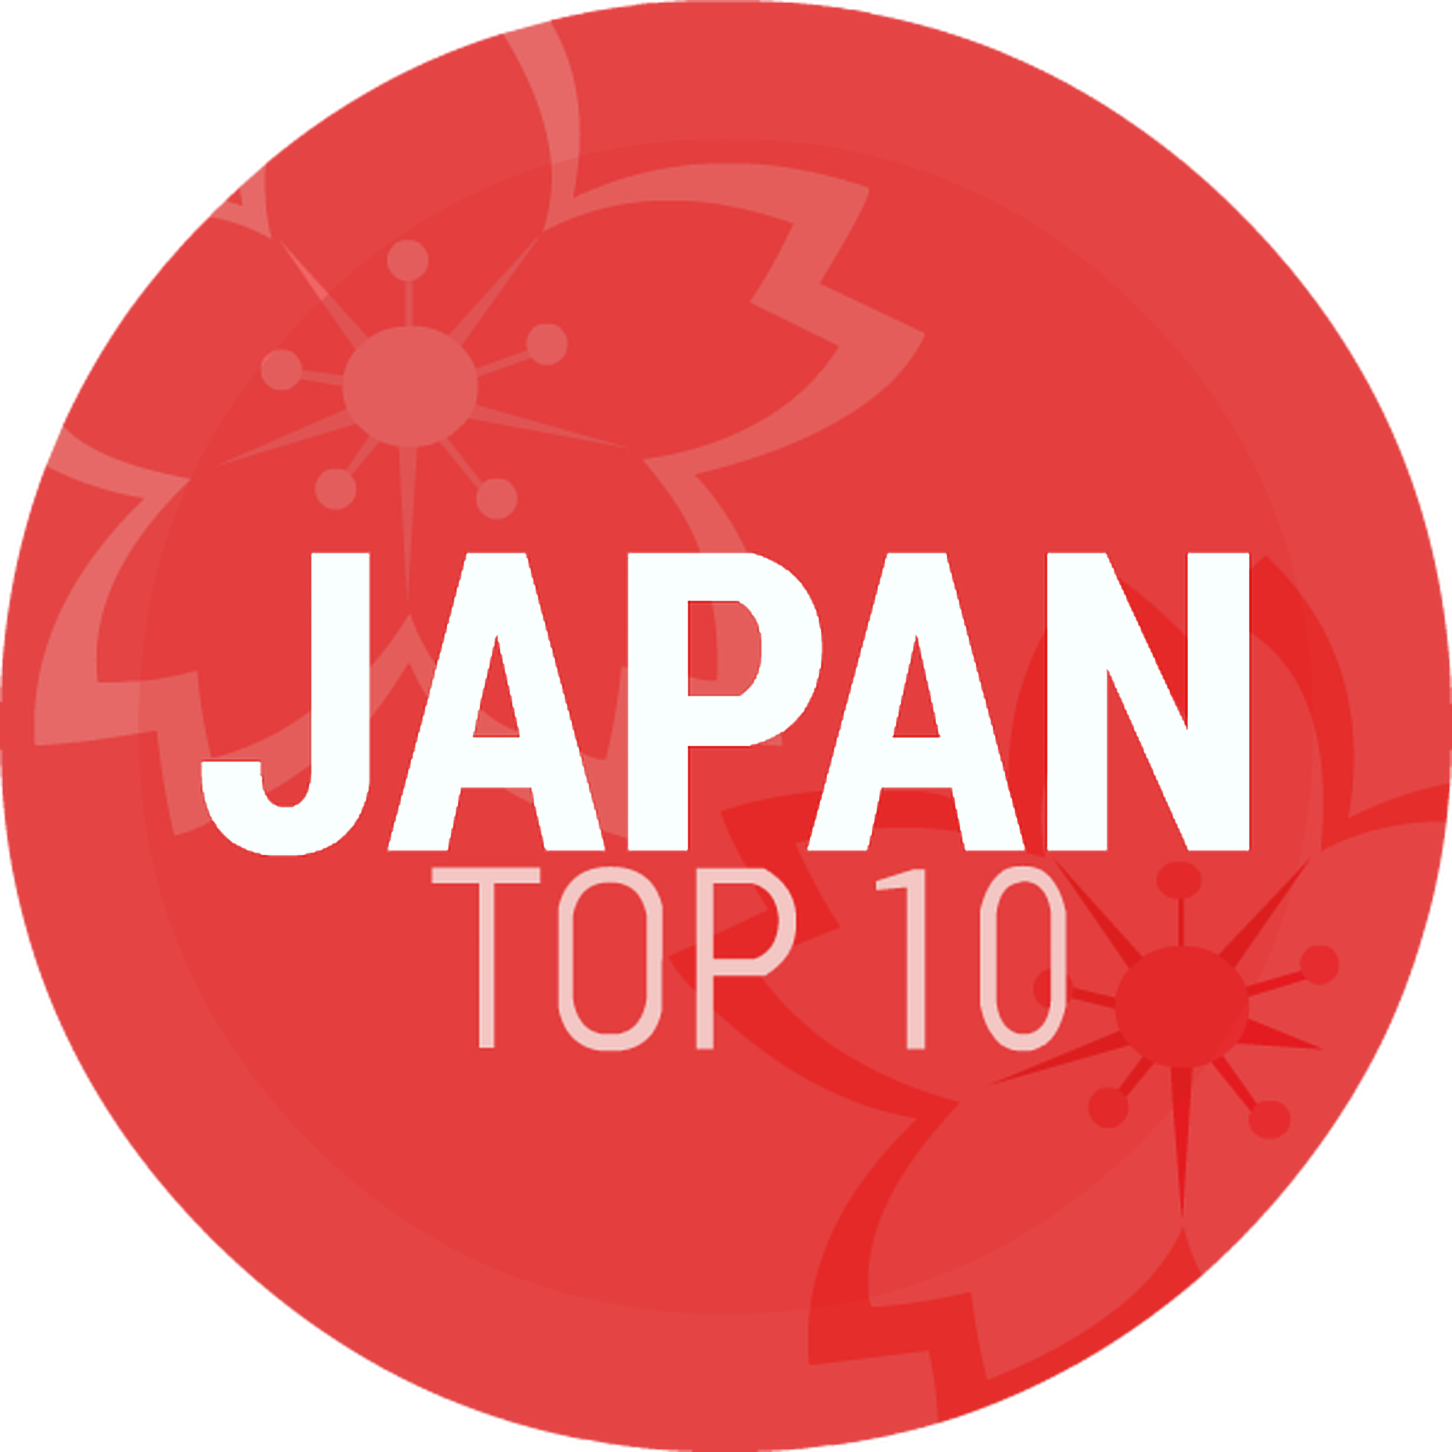 Episode 138: Japan Top 10 Mid May 2016 Countdown